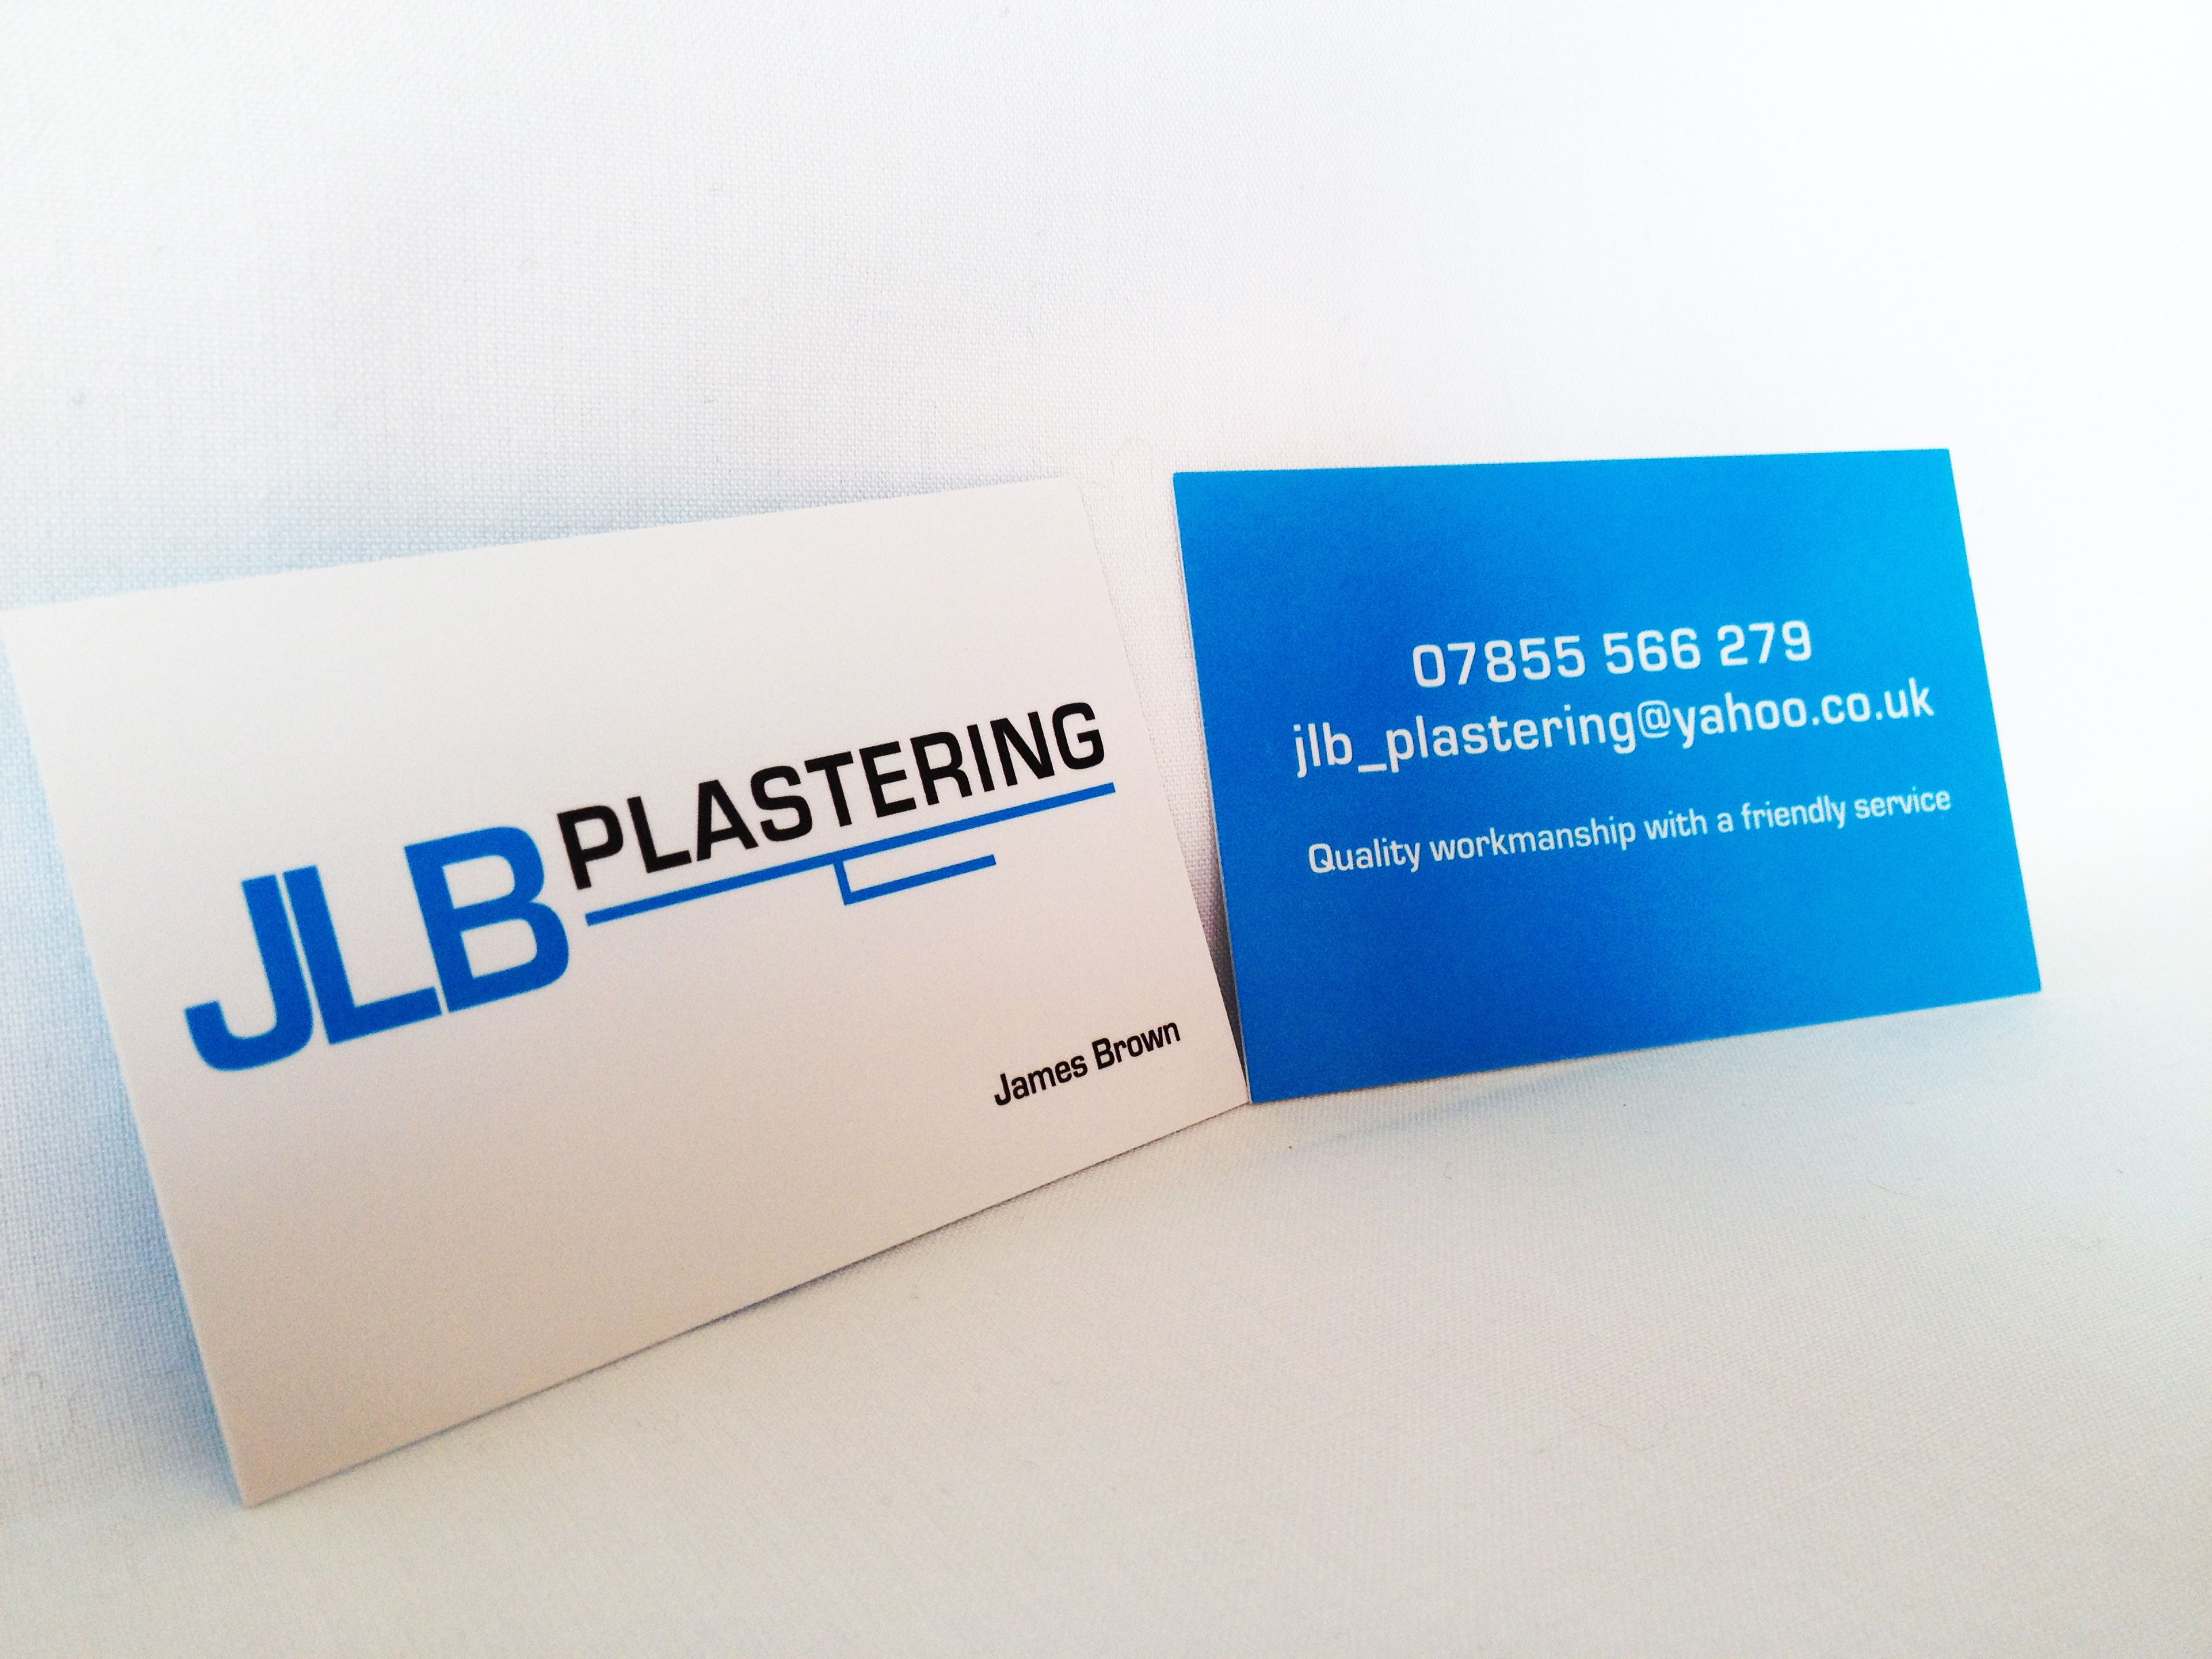 New Jlb Plastering Business Cards And Logo Design | Logos Pertaining To Plastering Business Cards Templates